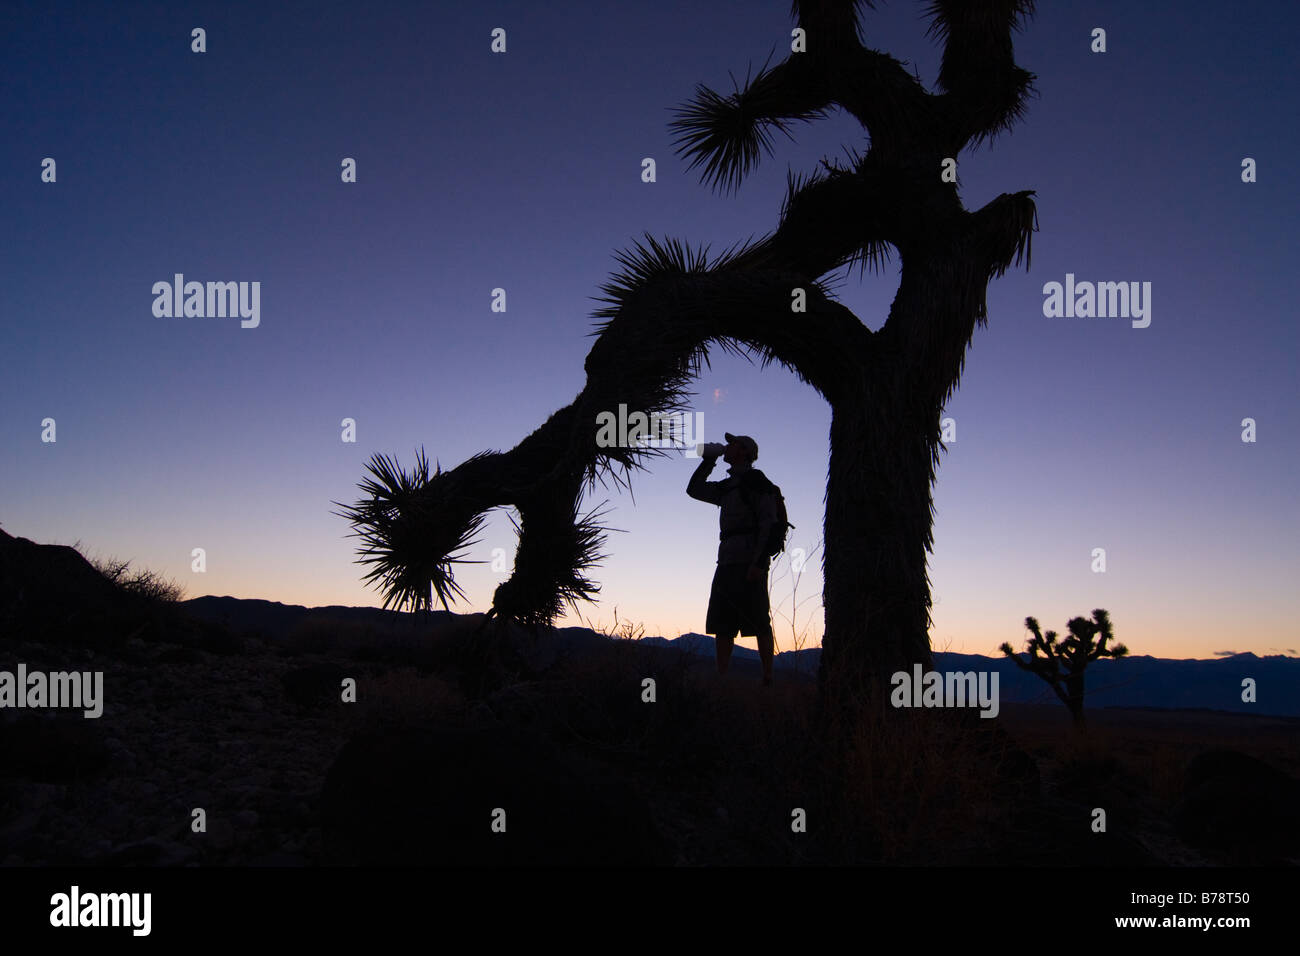 A silhouette of a male hiker by a Joshua Tree at sunset drinking from a bottle near Lone Pine in California Stock Photo